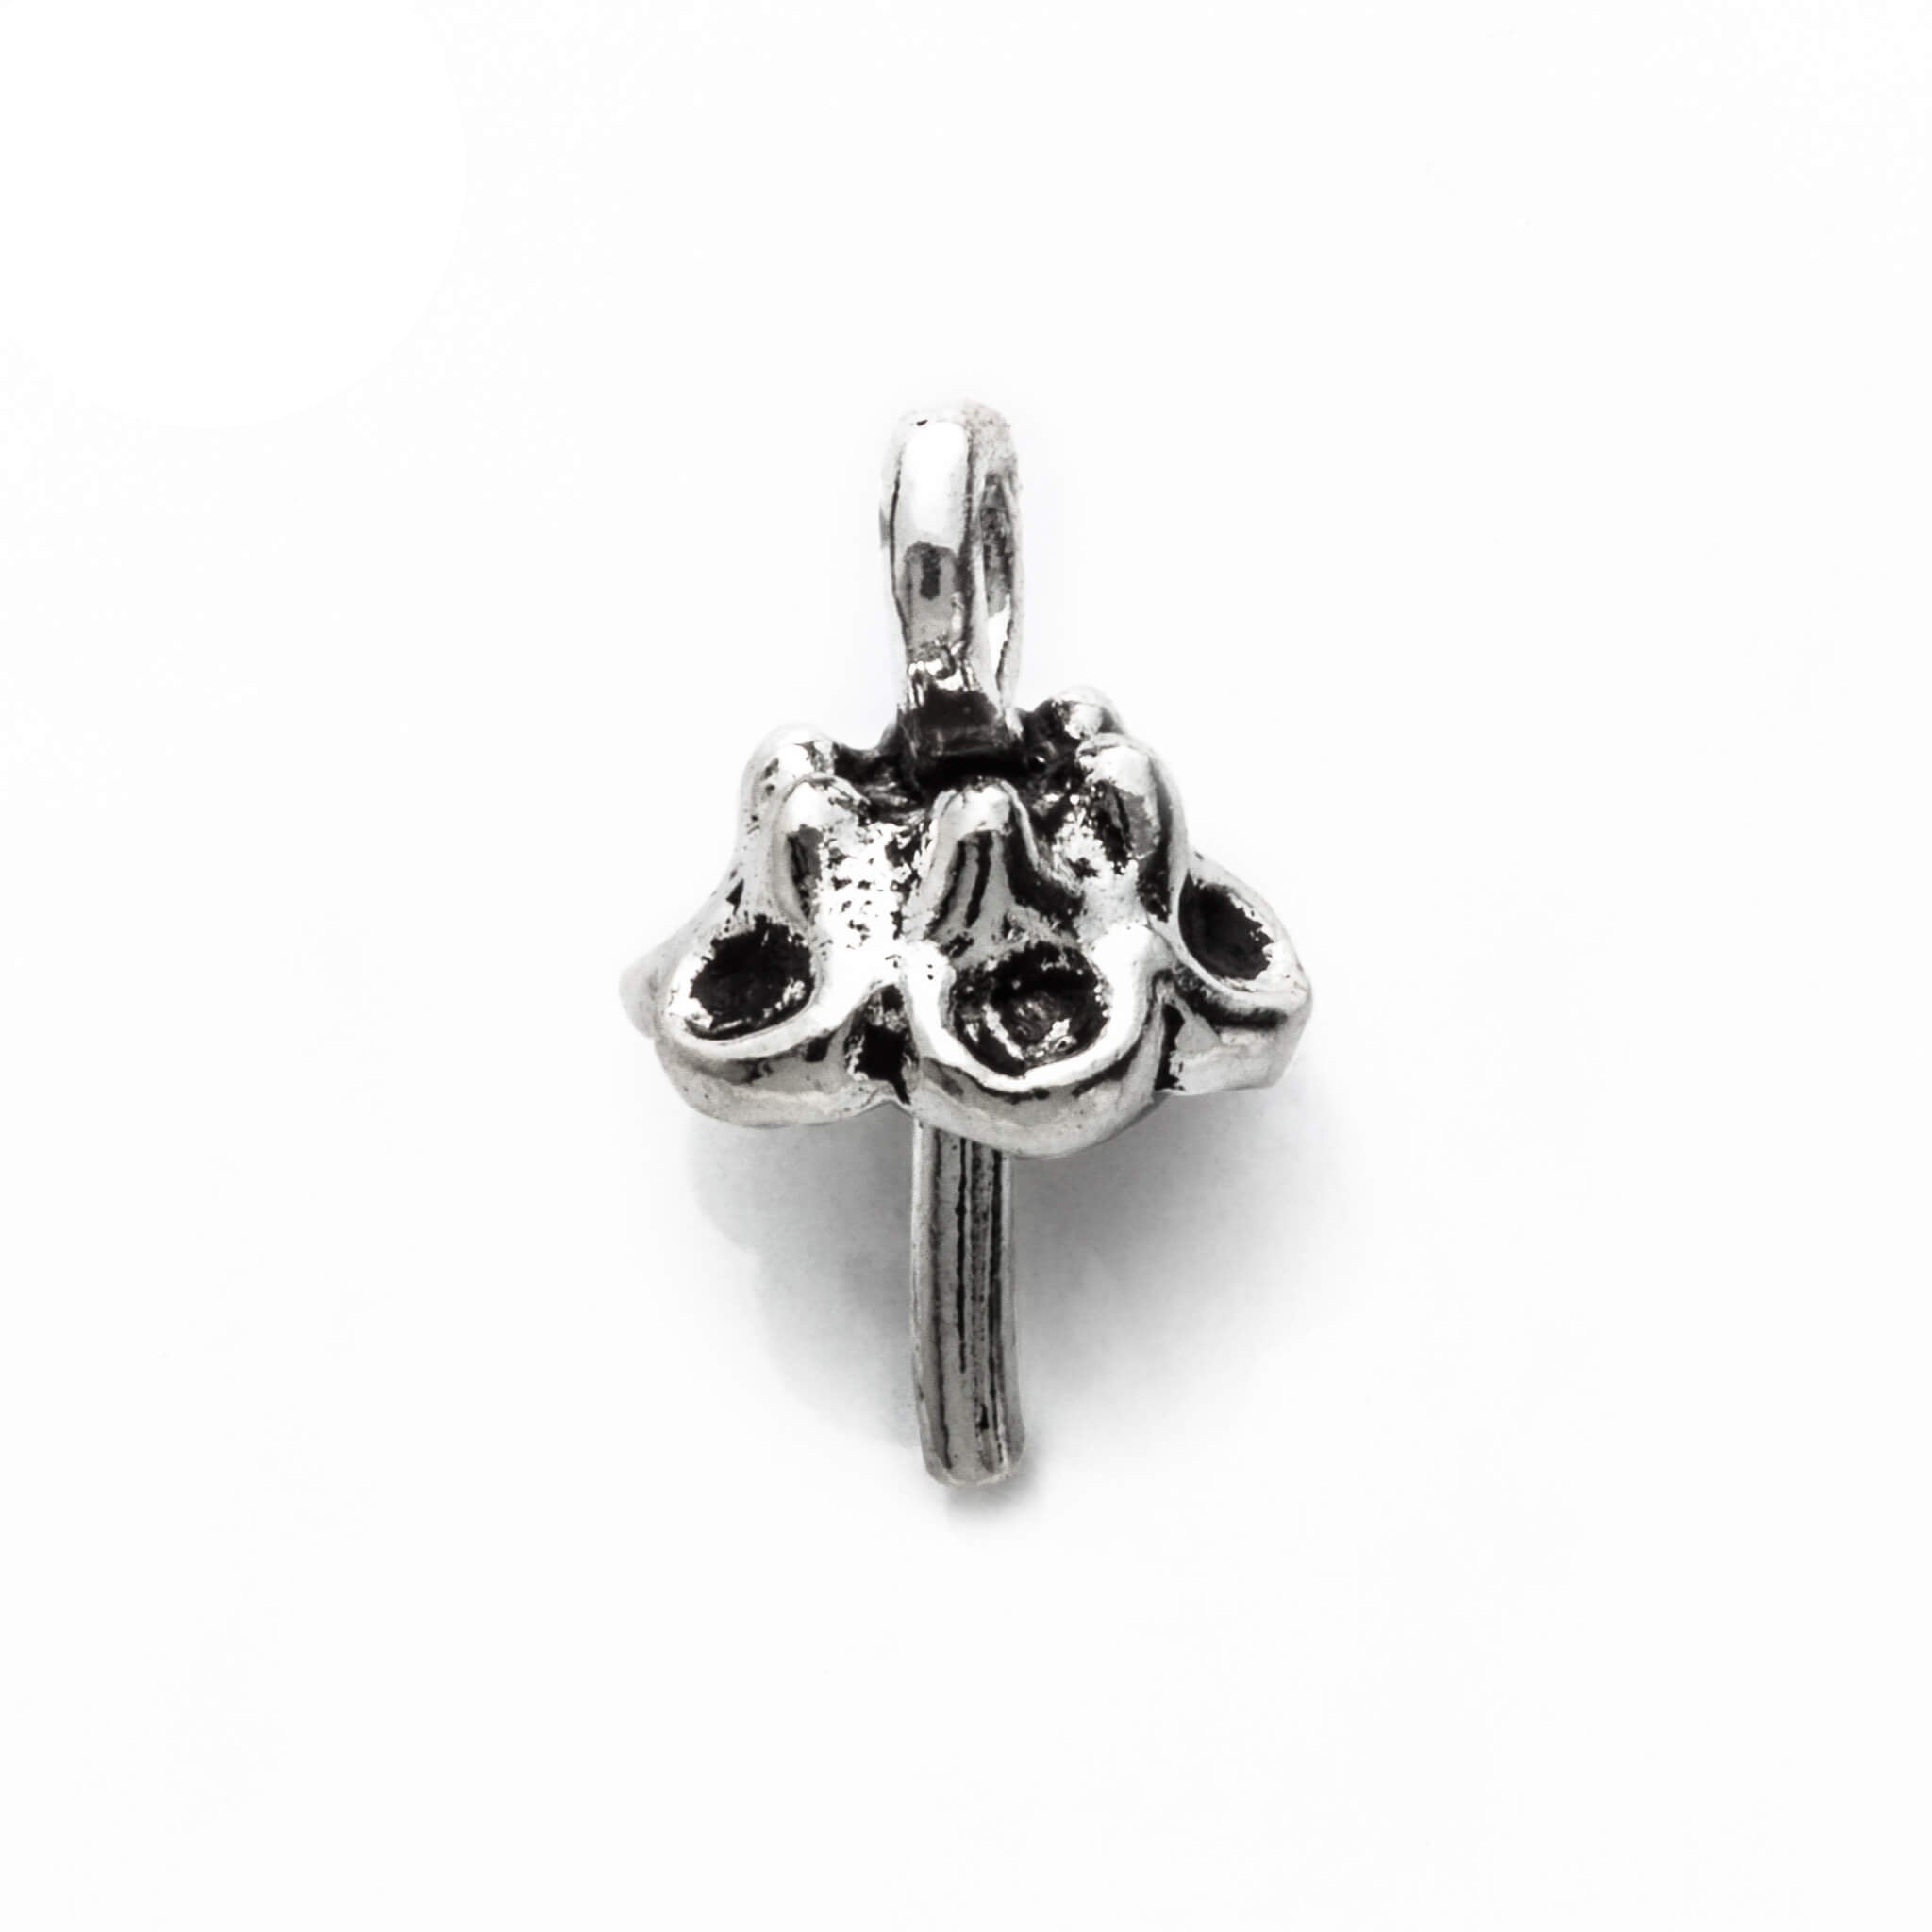 Pendant Pearl Setting with Round Cup and Peg Mounting including Bail in Sterling Silver 6mm